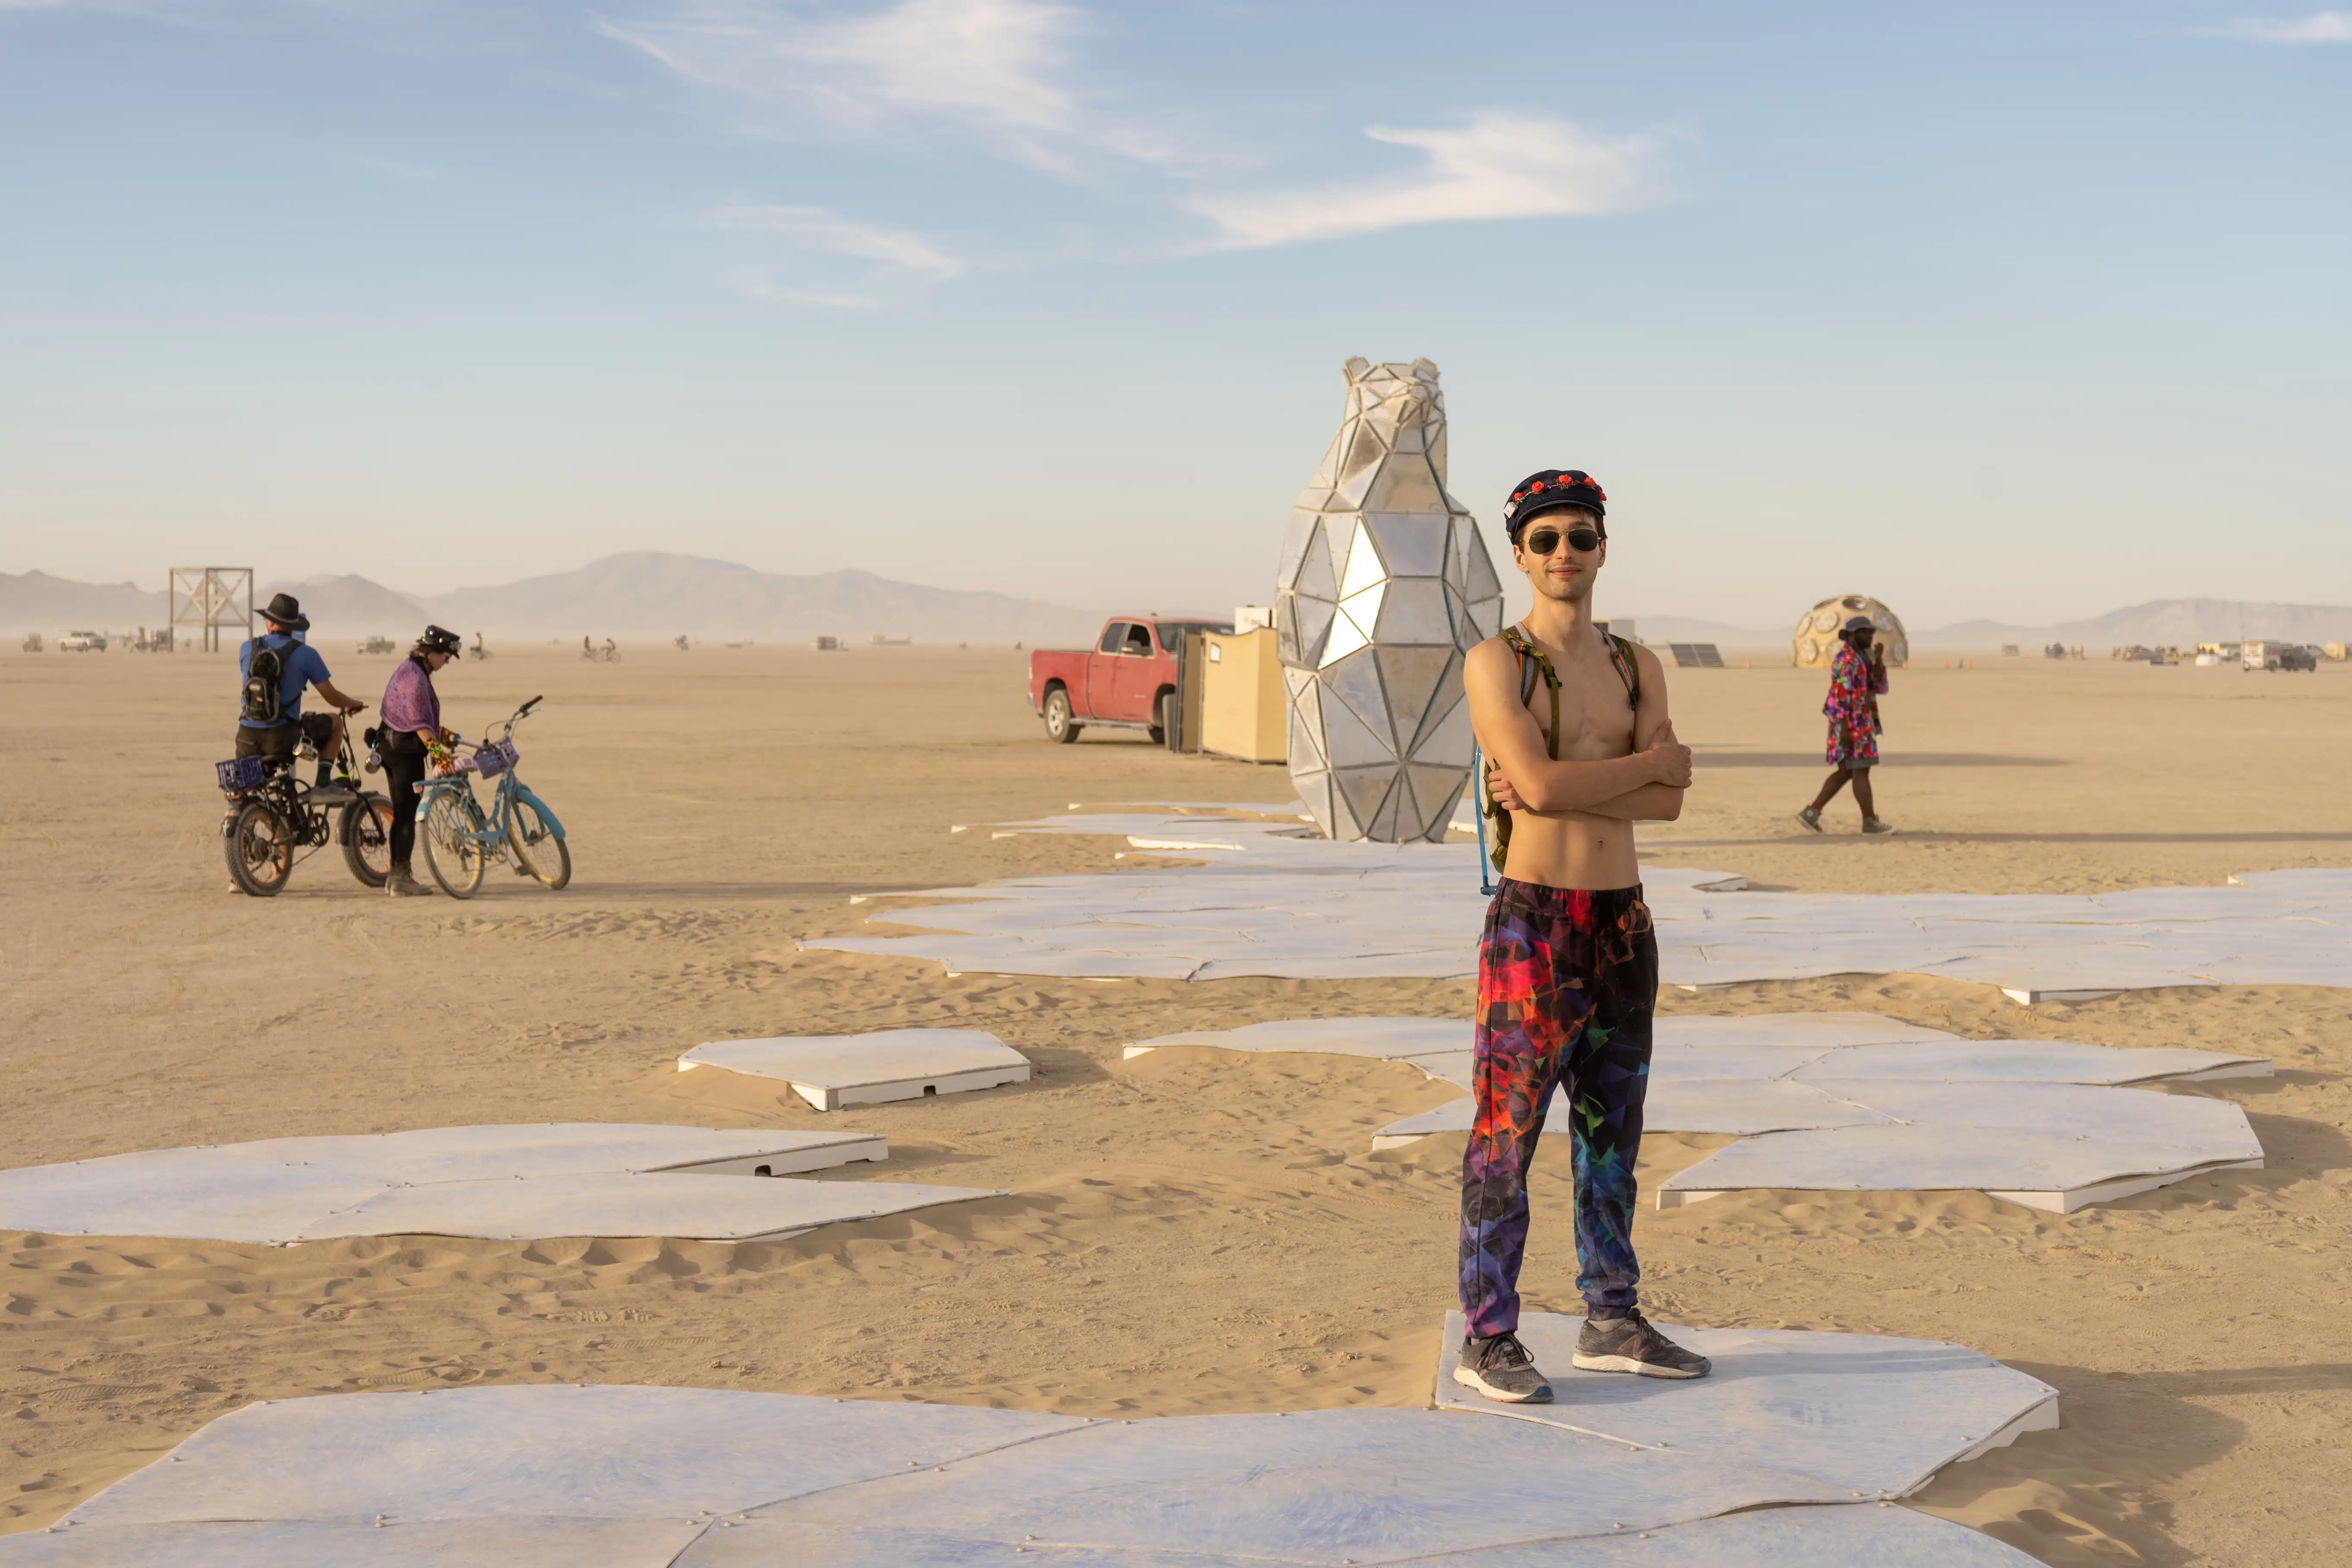 An artwork in the Black Rock Desert with a sculpture of a polar bear, made of shiny triangles, about 15 feet high. The polar bear is looking out on fragments of white shapes which represent ice floes. The ice is being swallowed by the desert, symbolizing the loss of the Polar Bear's habitat. In the foreground, a lean french twink with little-to-no body hair is wearing a beret with flowers, a backpack, sunglasses, no shirt, and colorful trousers. In the background you see other artworks, bicycles, and burners.